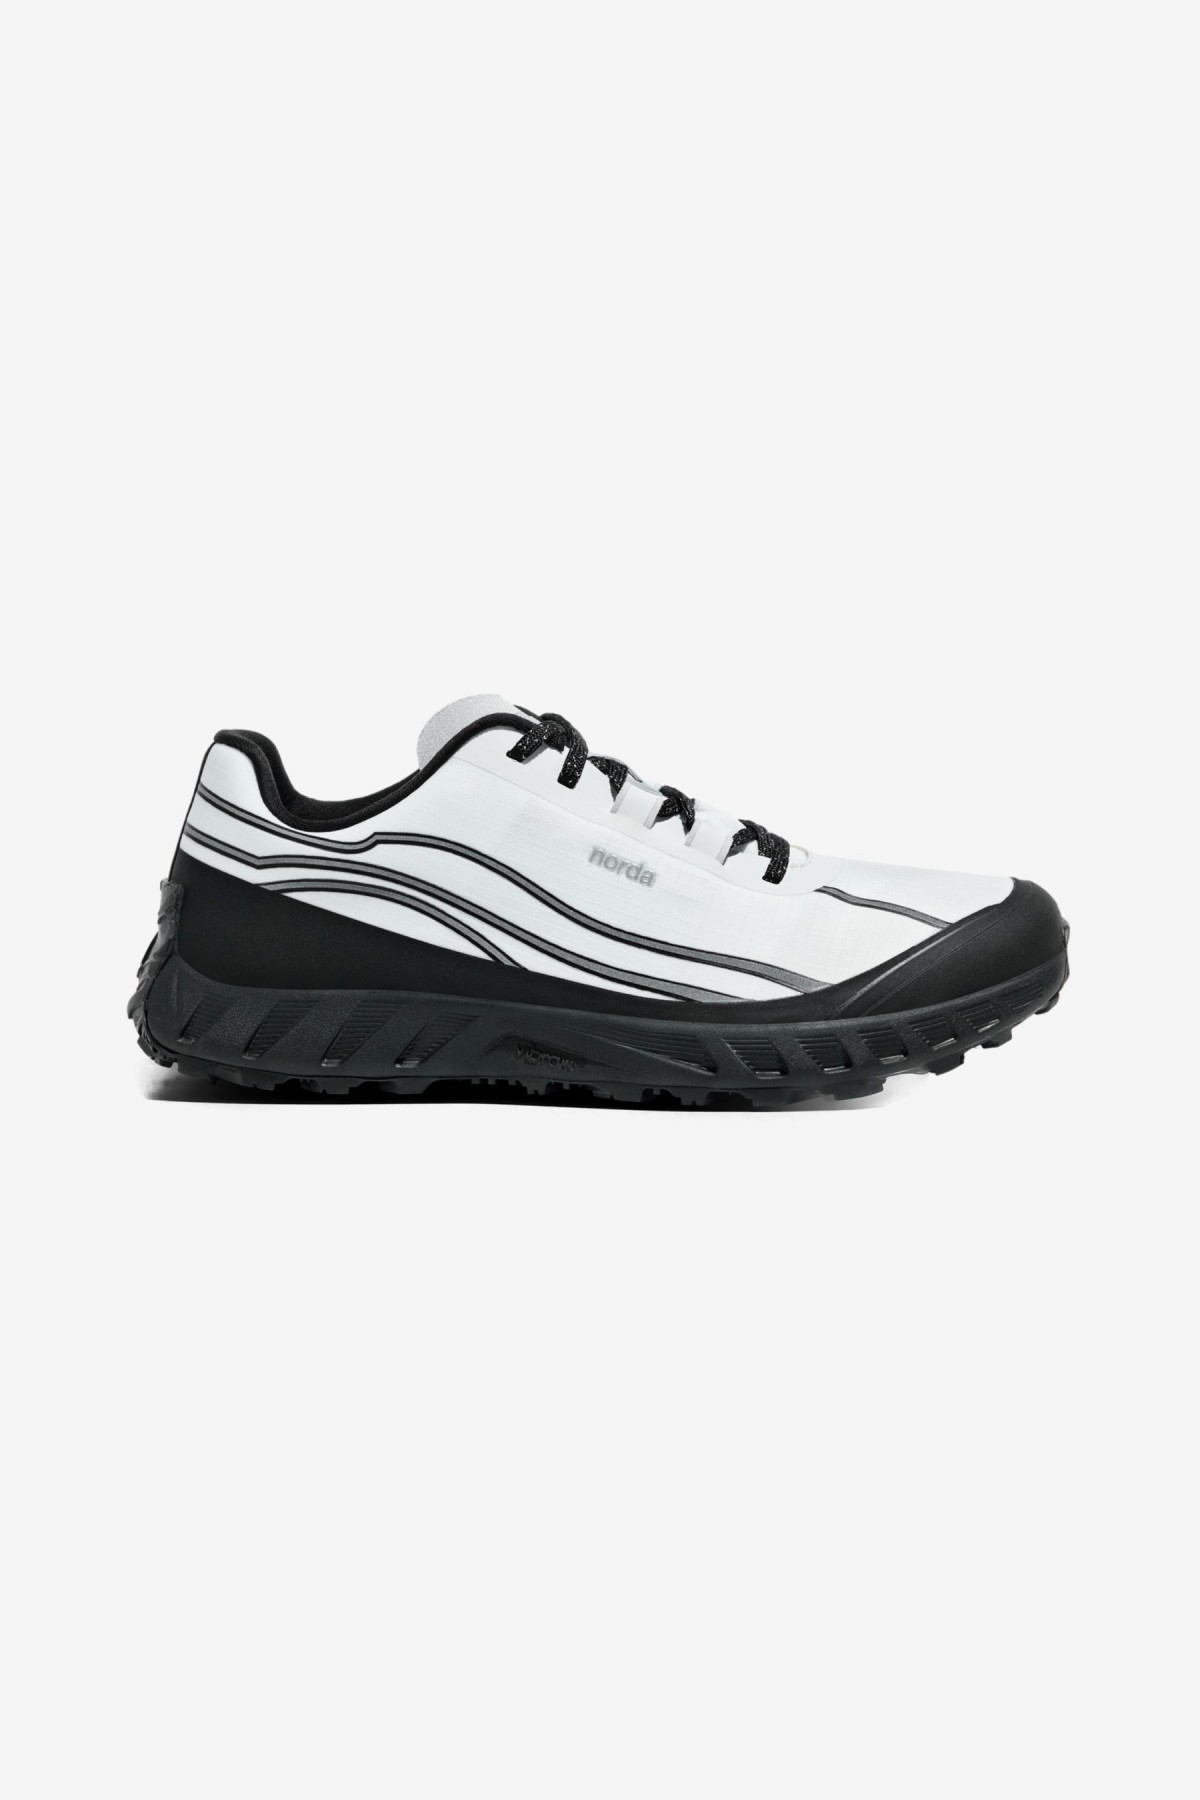 Norda 002 Trail Shoes in White